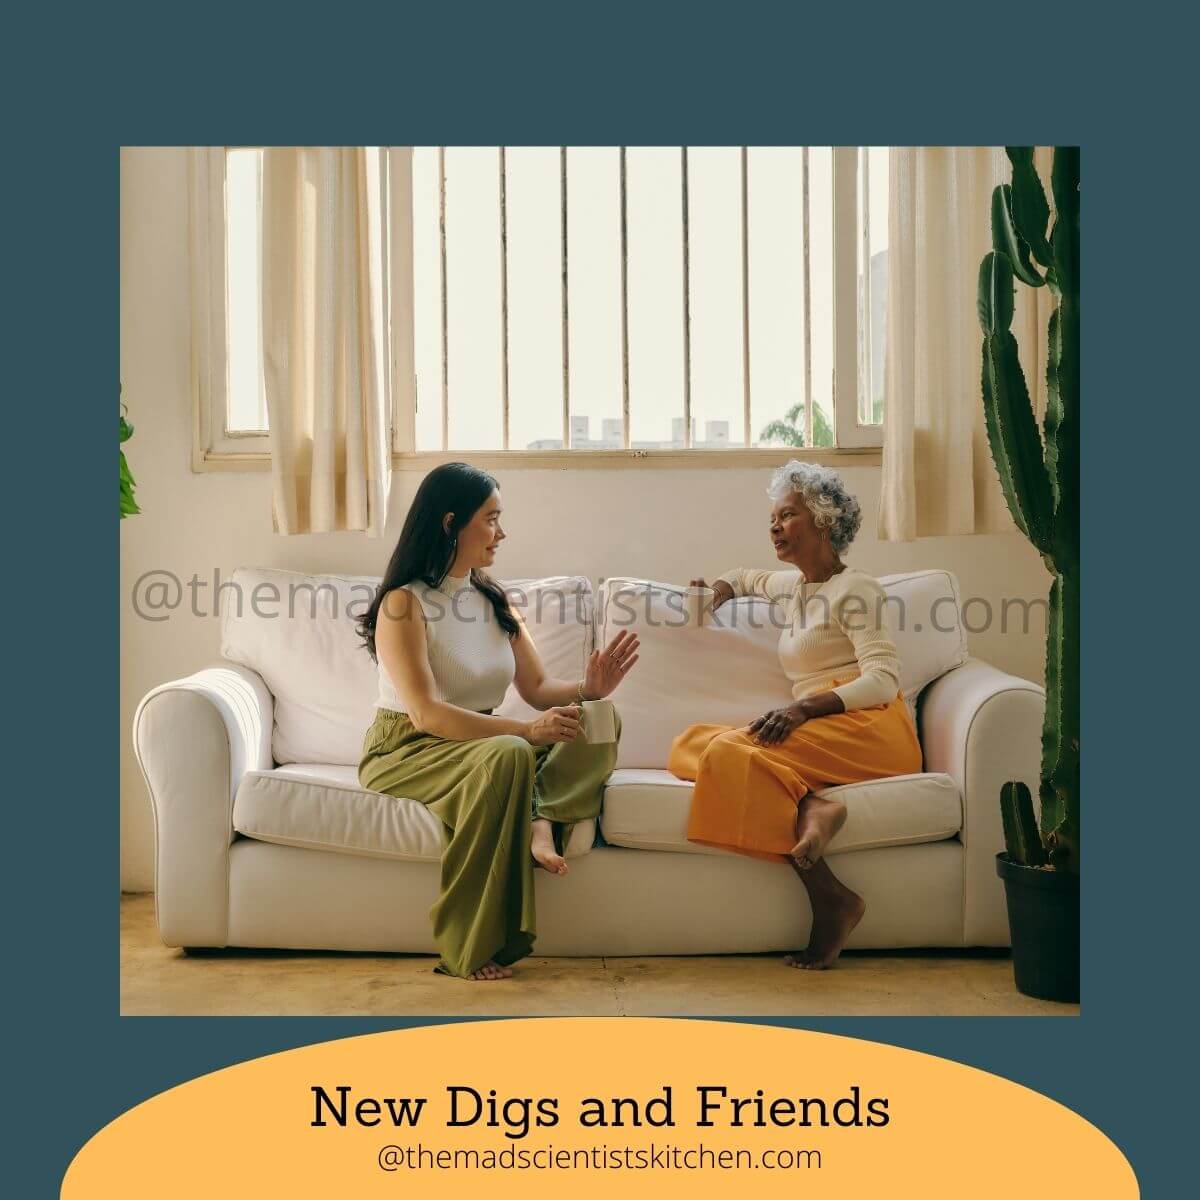 Make new friends very important for living independently in a new city